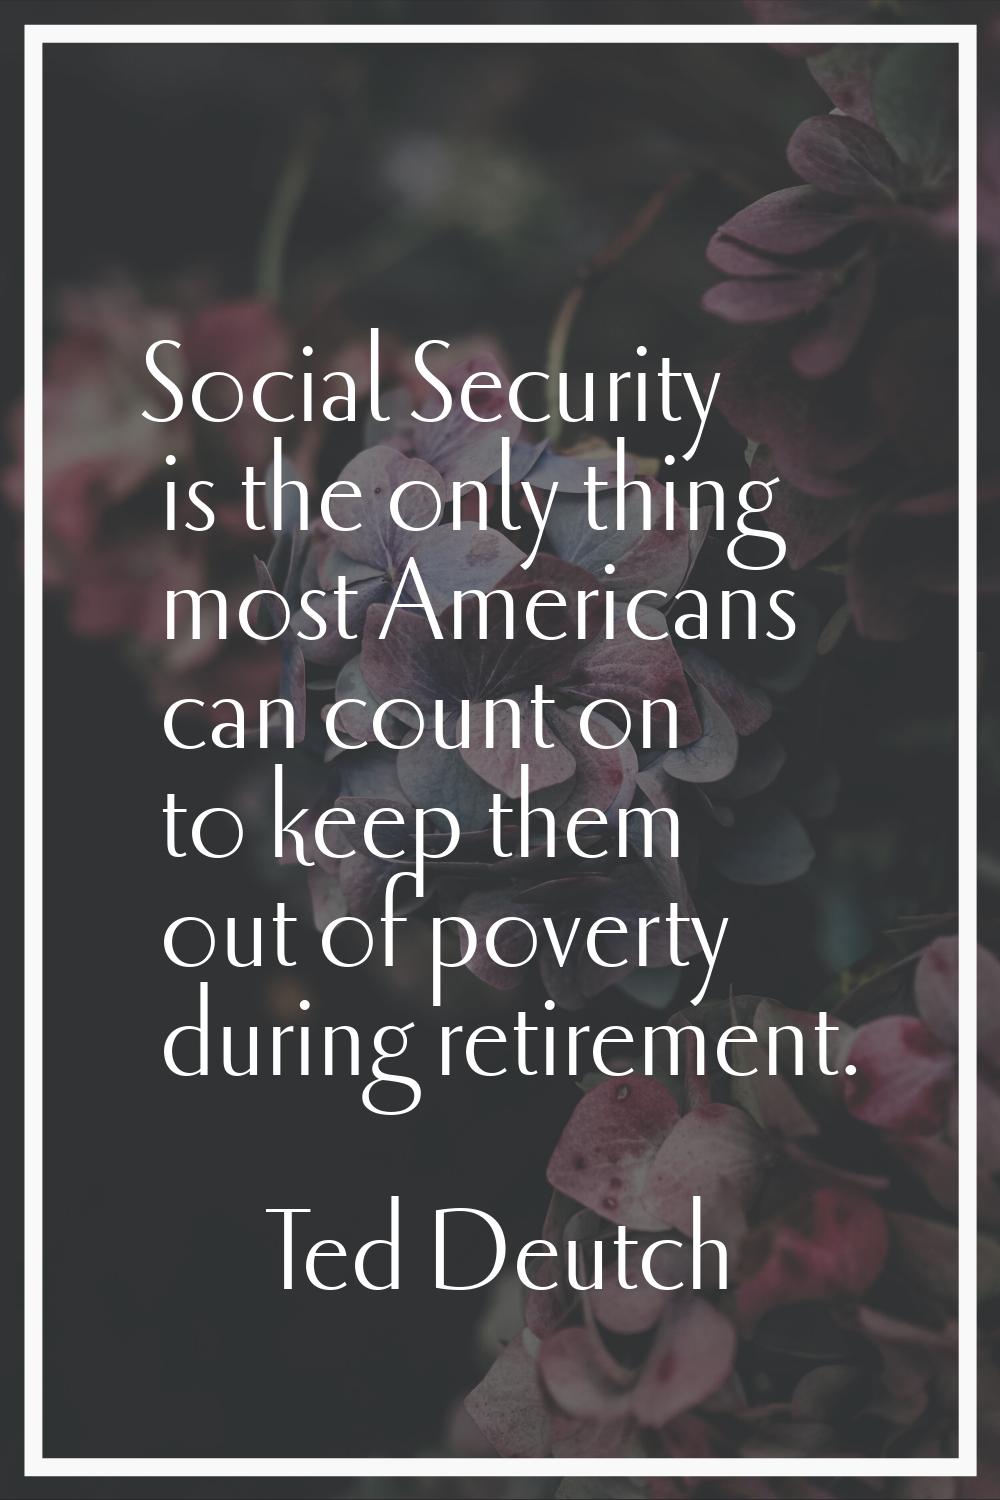 Social Security is the only thing most Americans can count on to keep them out of poverty during re